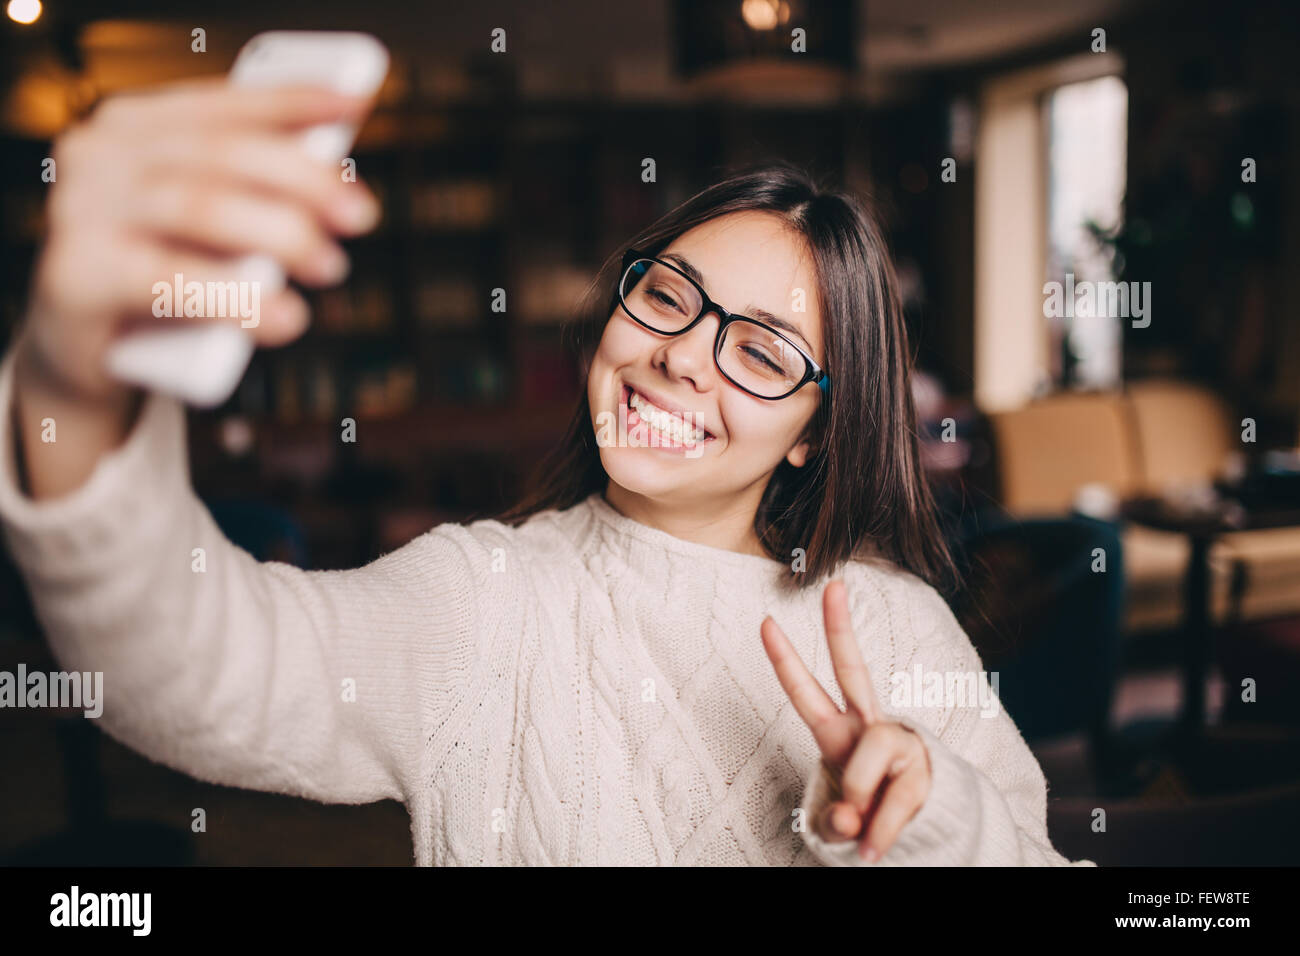 young smiling brunette woman making a selfie in a cafe Stock Photo